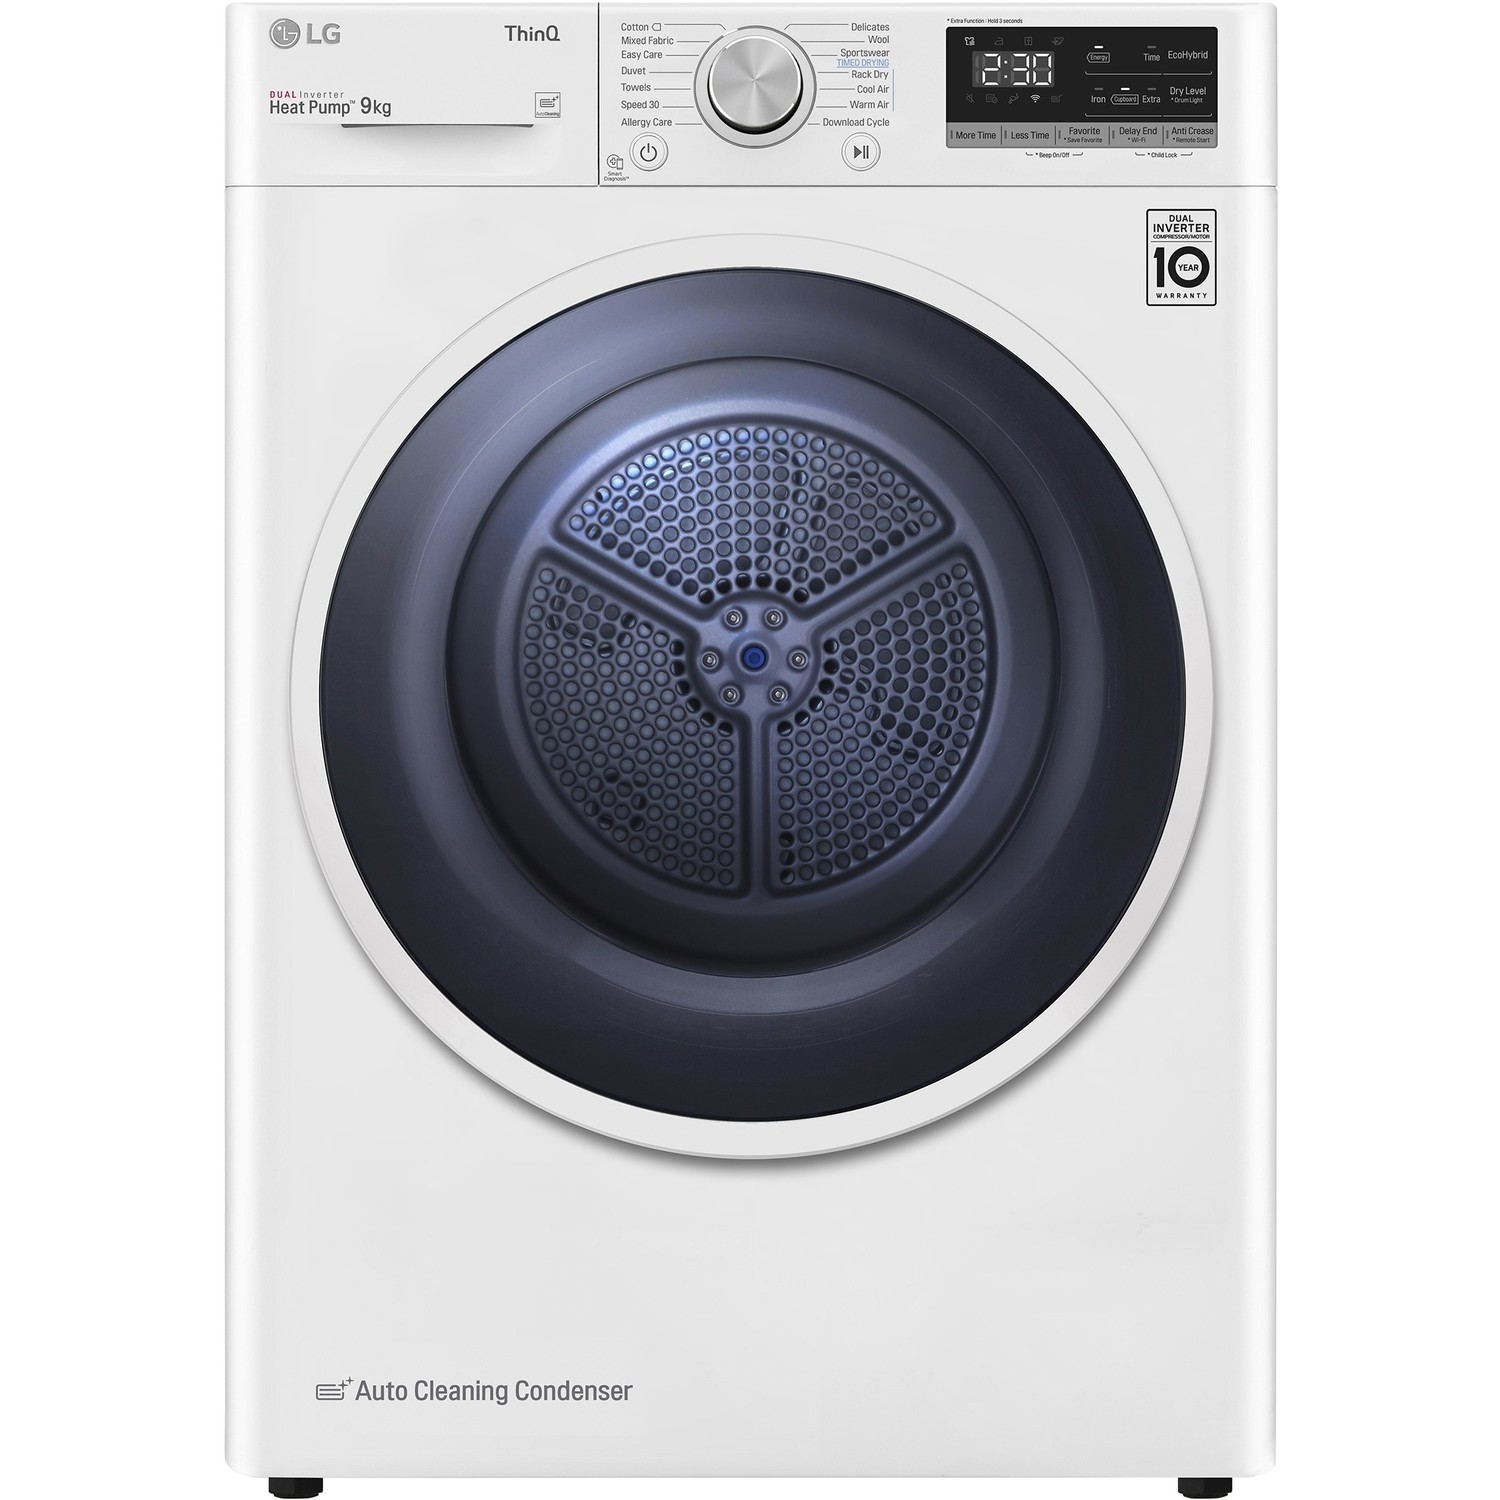 LG Wifi Connected Freestanding 9kg Heat Pump Tumble Dryer - White